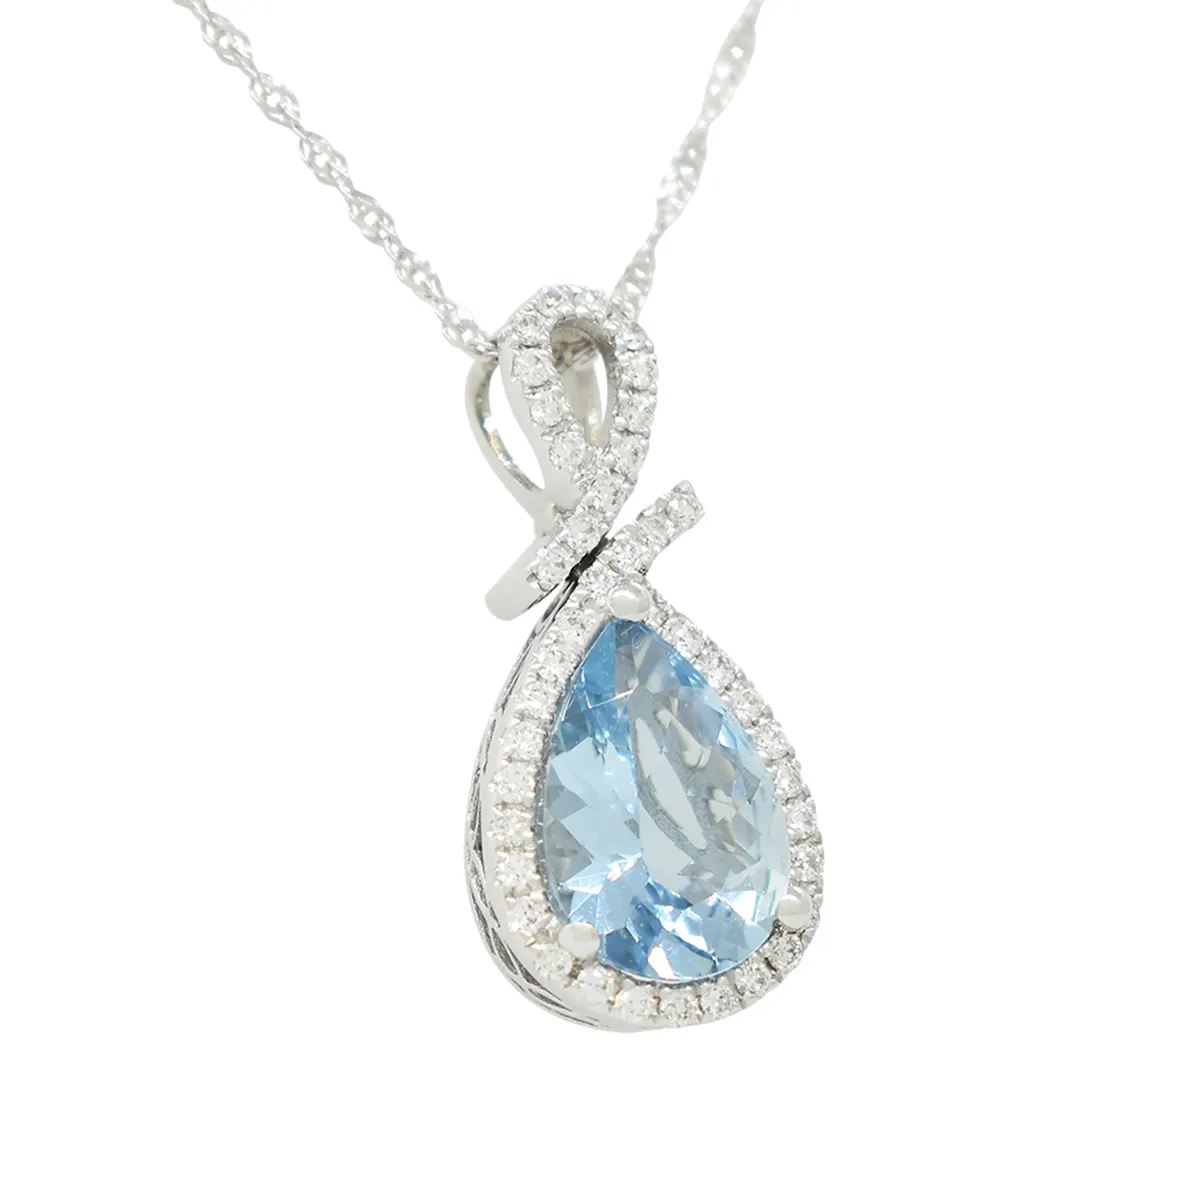 teardrop-aquamarine-necklace-in-white-gold-with-diamond-halo-in-fine-micro-pave